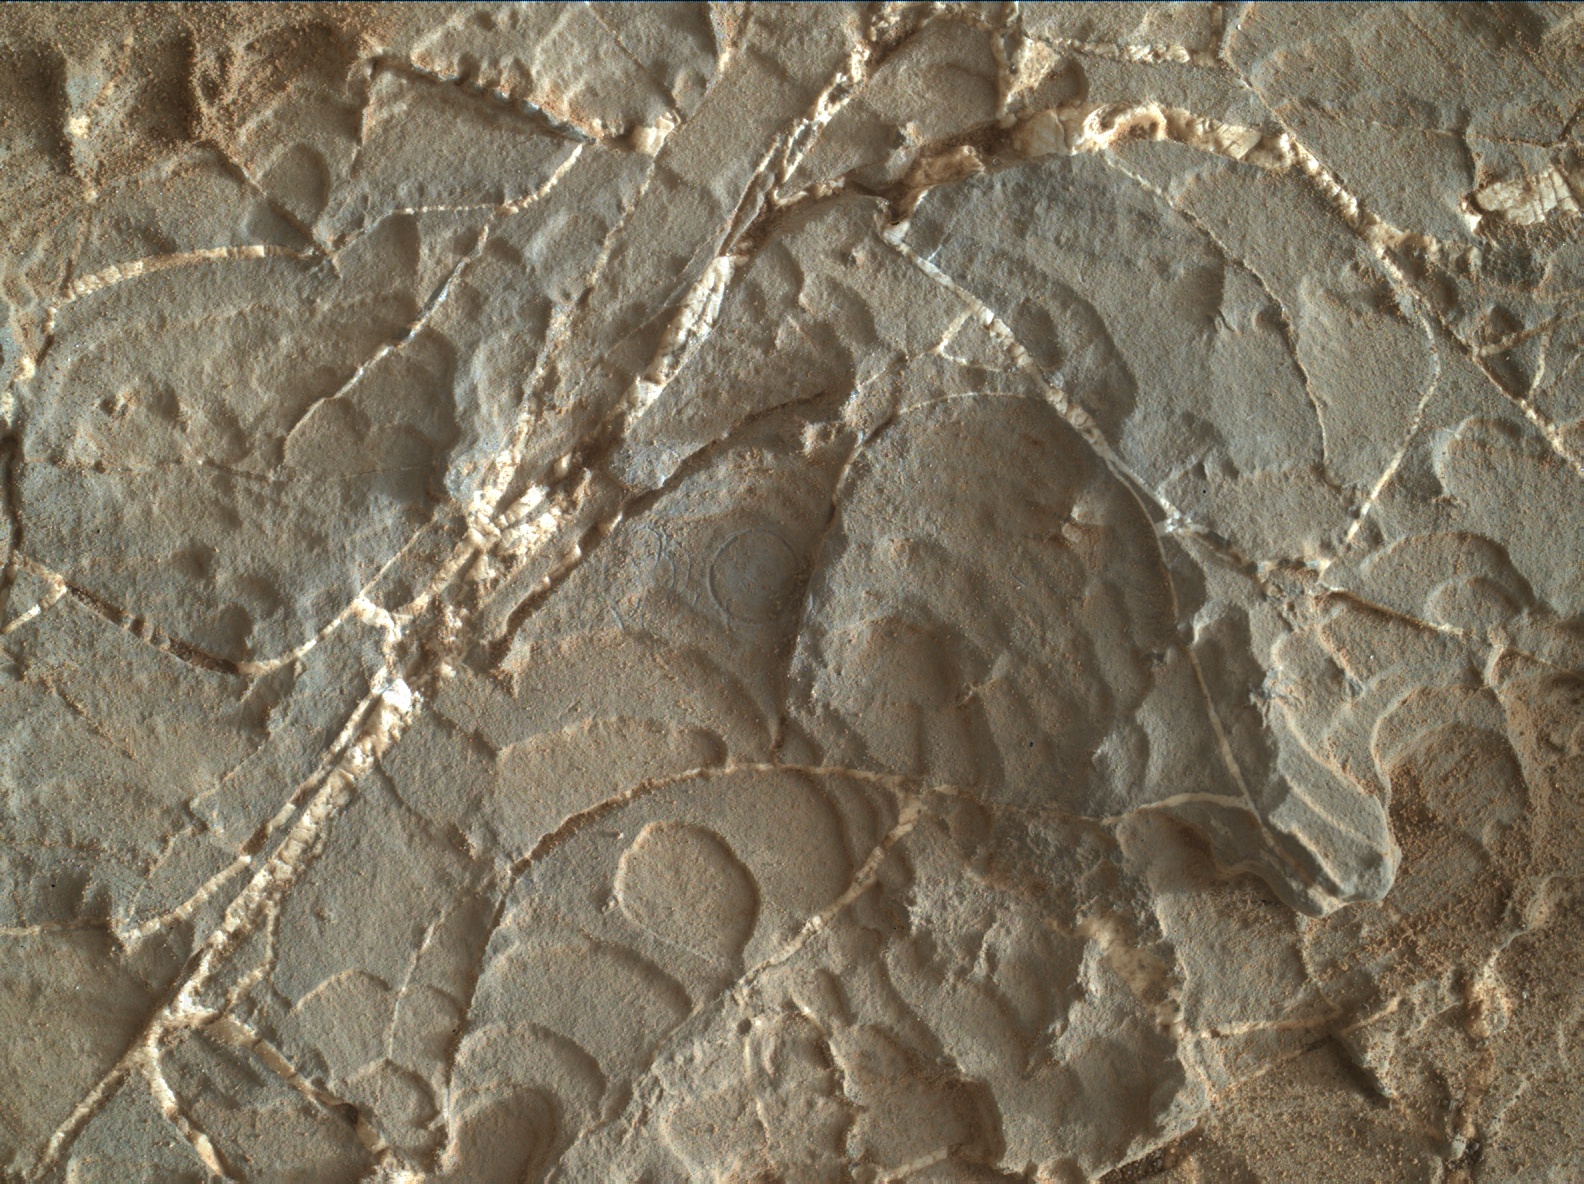 Nasa's Mars rover Curiosity acquired this image using its Mars Hand Lens Imager (MAHLI) on Sol 1931